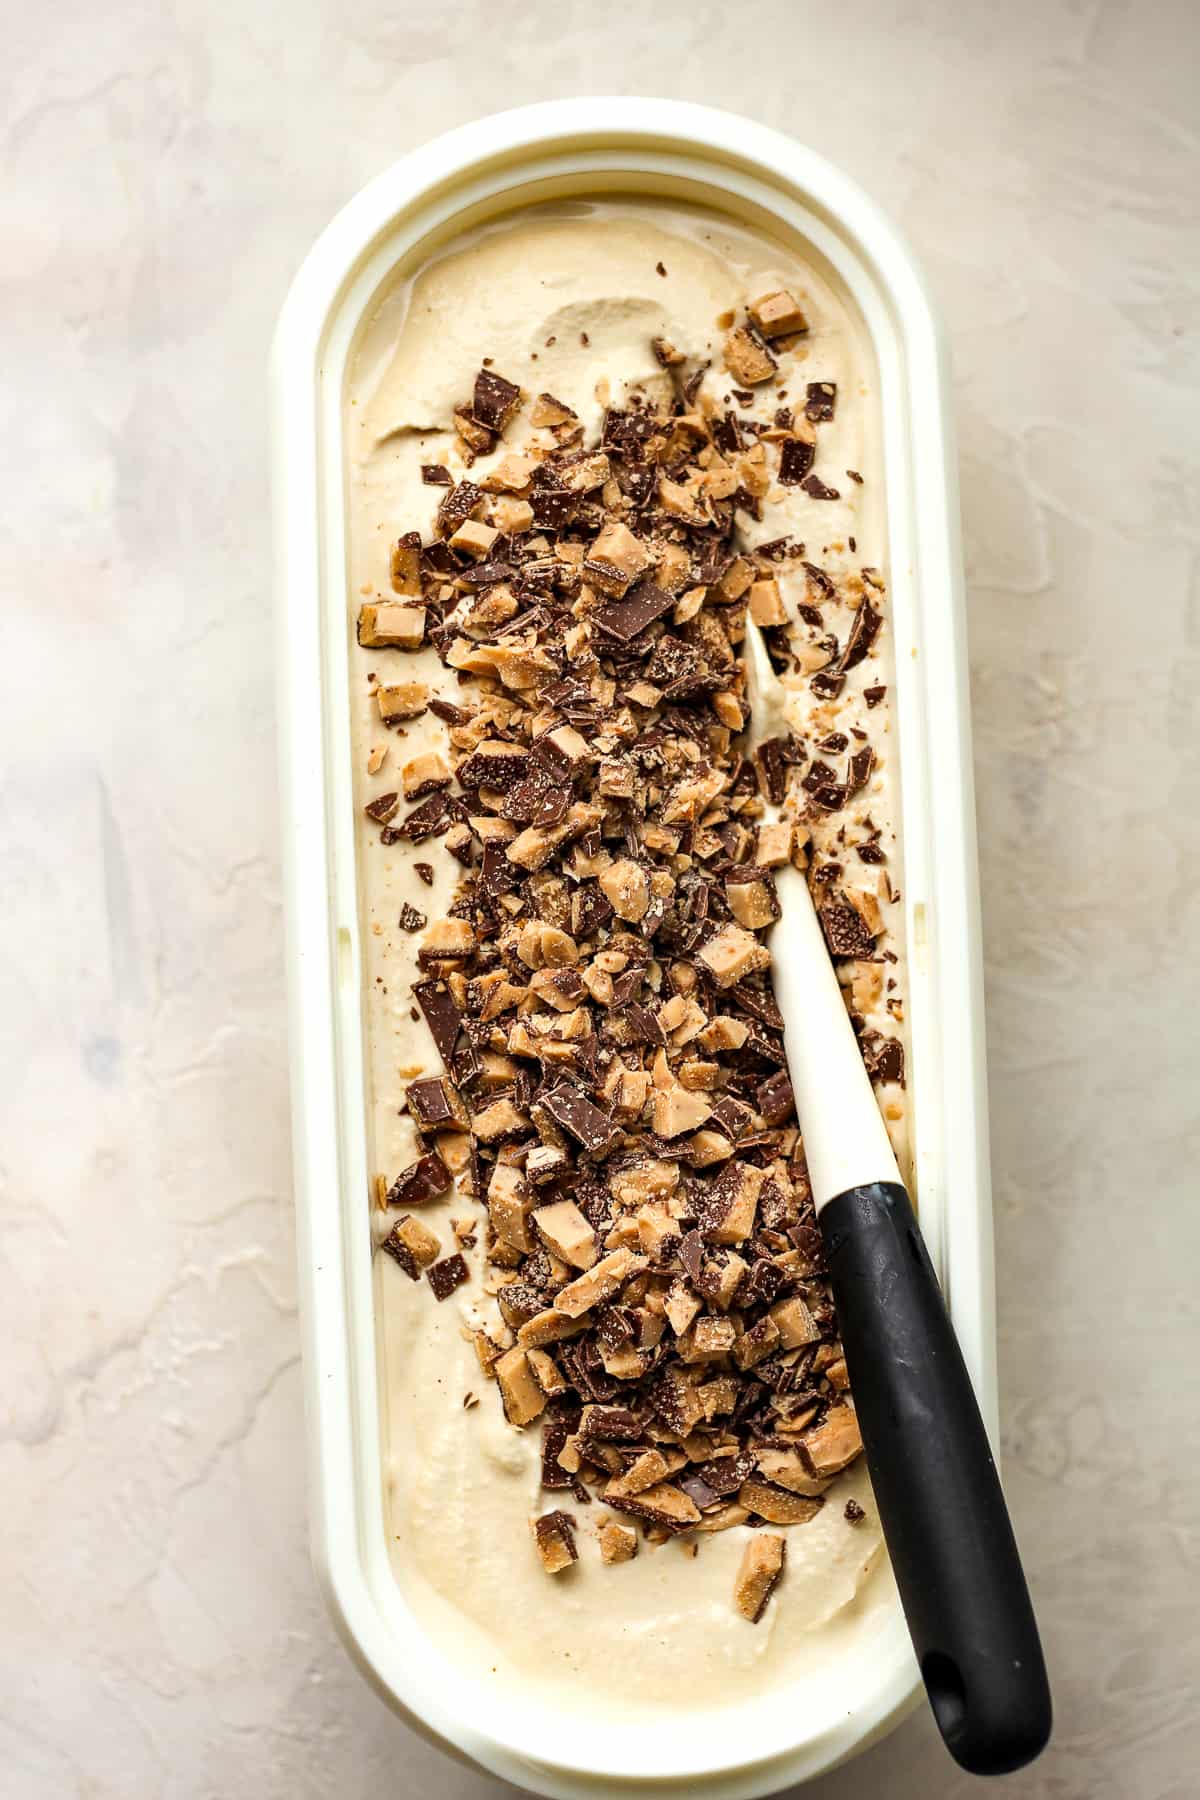 A container of the coffee ice cream with chopped toffee on top.